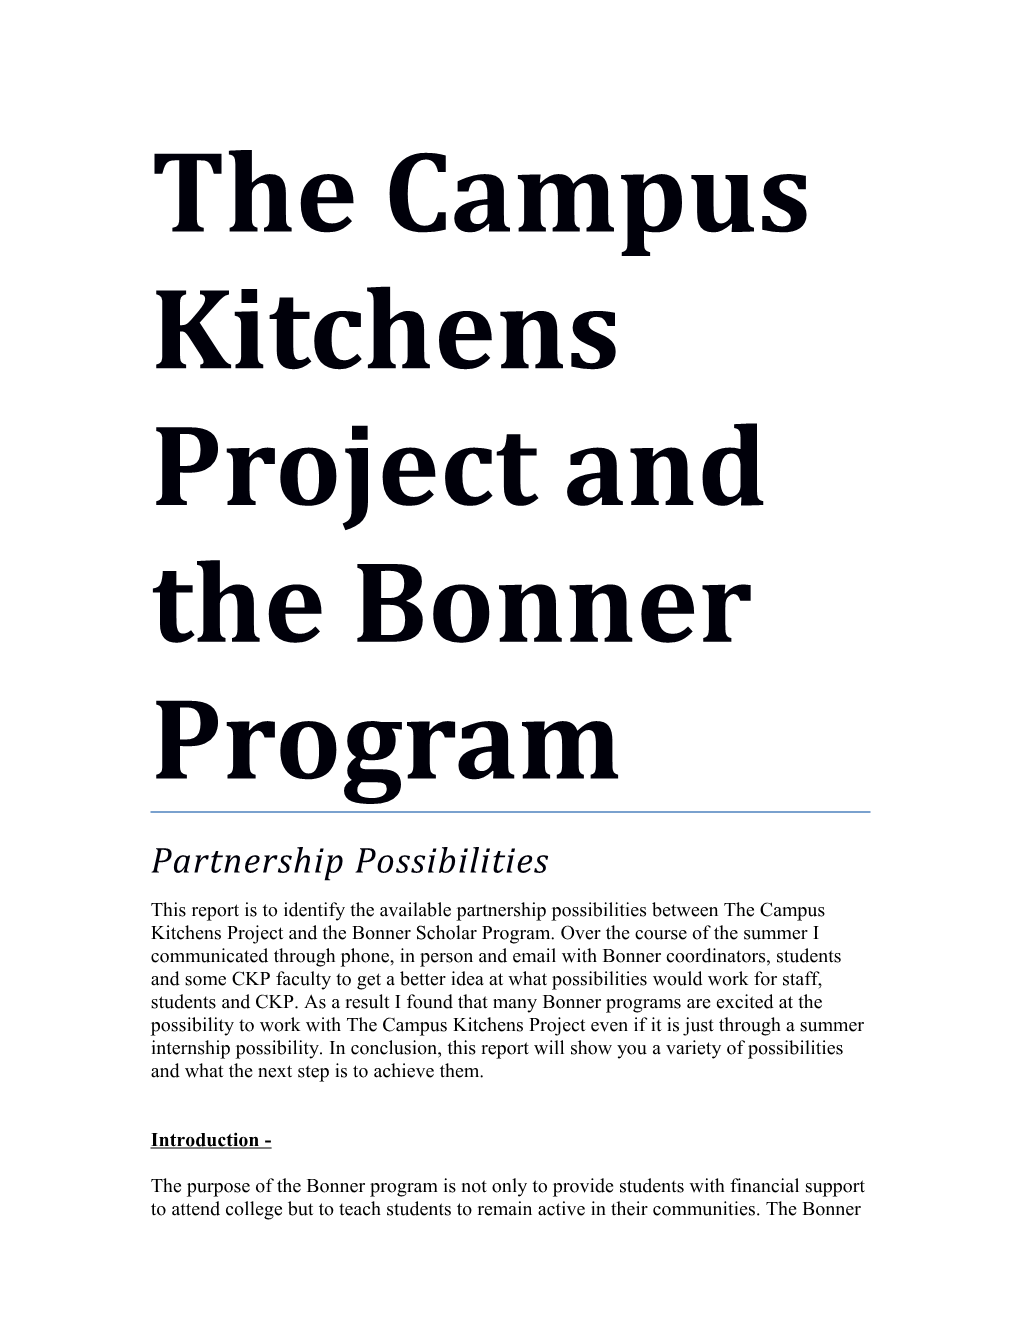 The Campus Kitchens Project and the Bonner Program